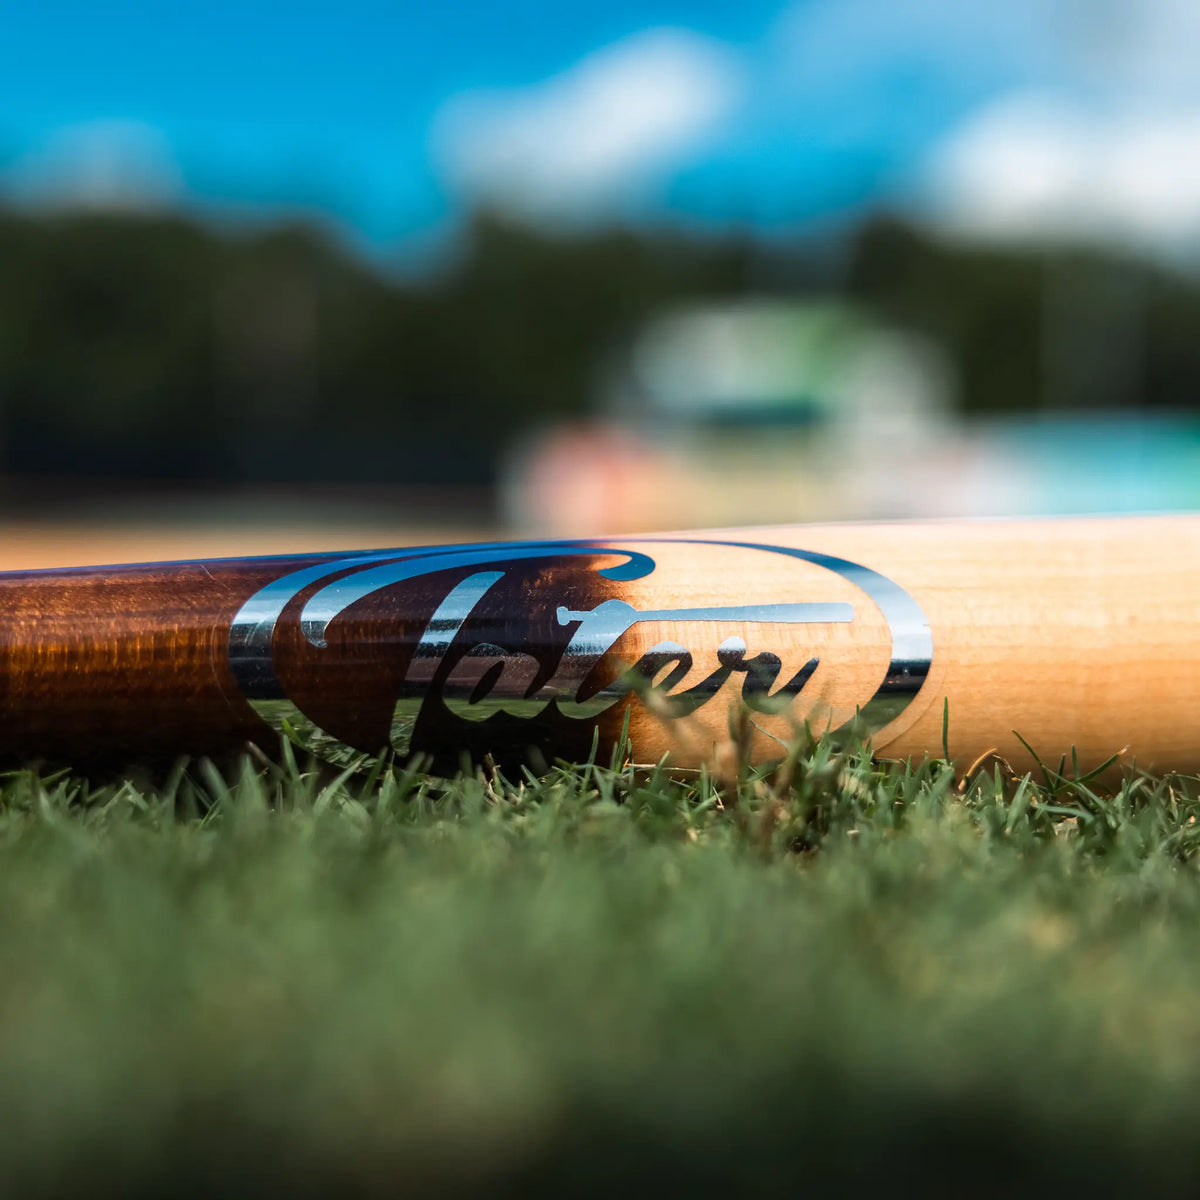 An image showcasing the popular Tater X12 Pro Maple bat, which stands out for its performance on the field, sturdy construction, and timeless style that appeals to competitive players. Bat is resting on grass, closeup of Tater logo.This image captures a close-up view of a Tater X12 Pro Maple bat lying horizontally on the grass. The focus is on the bat&#39;s barrel which features the bold, black Tater logo, with a blurred baseball diamond in the background under a bright, clear sky.